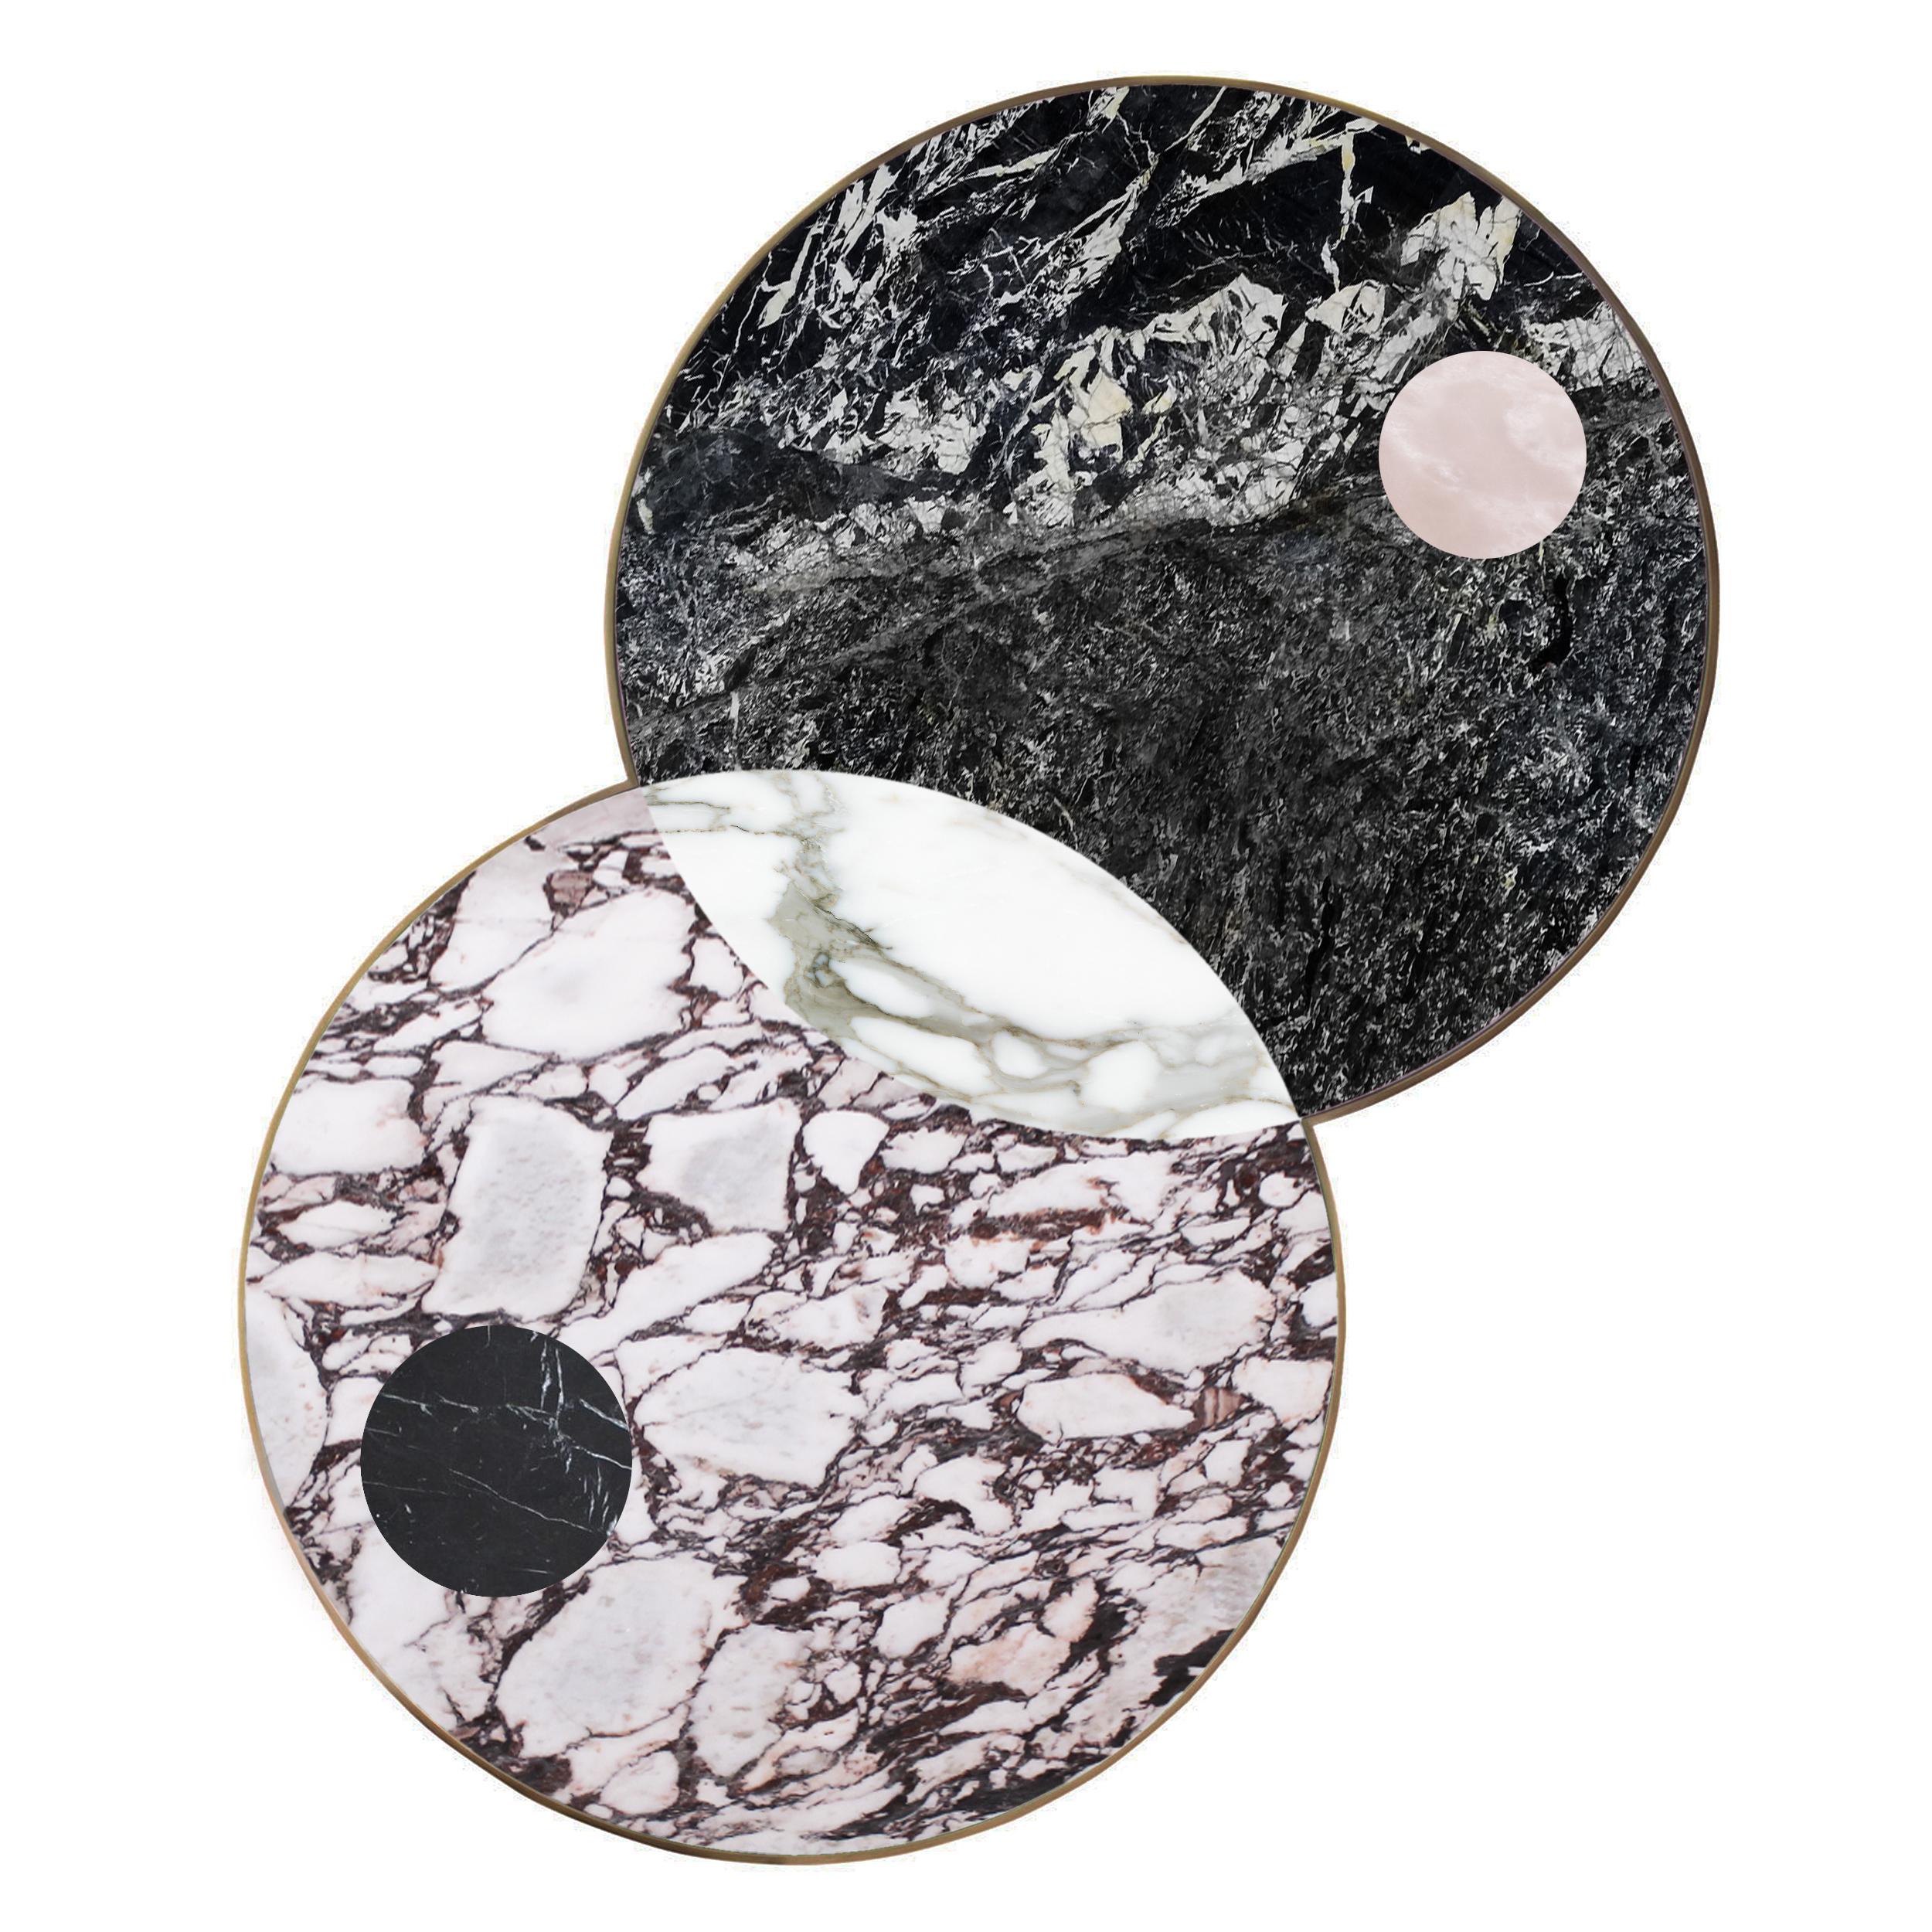 The Lunar Collection introduces the Half Moon dining table, the Sun and Moon coffee table and the Full Moon side table. Discs echoing planetary forms are bisected or overlaid to create surface patterns and structural elements, forming